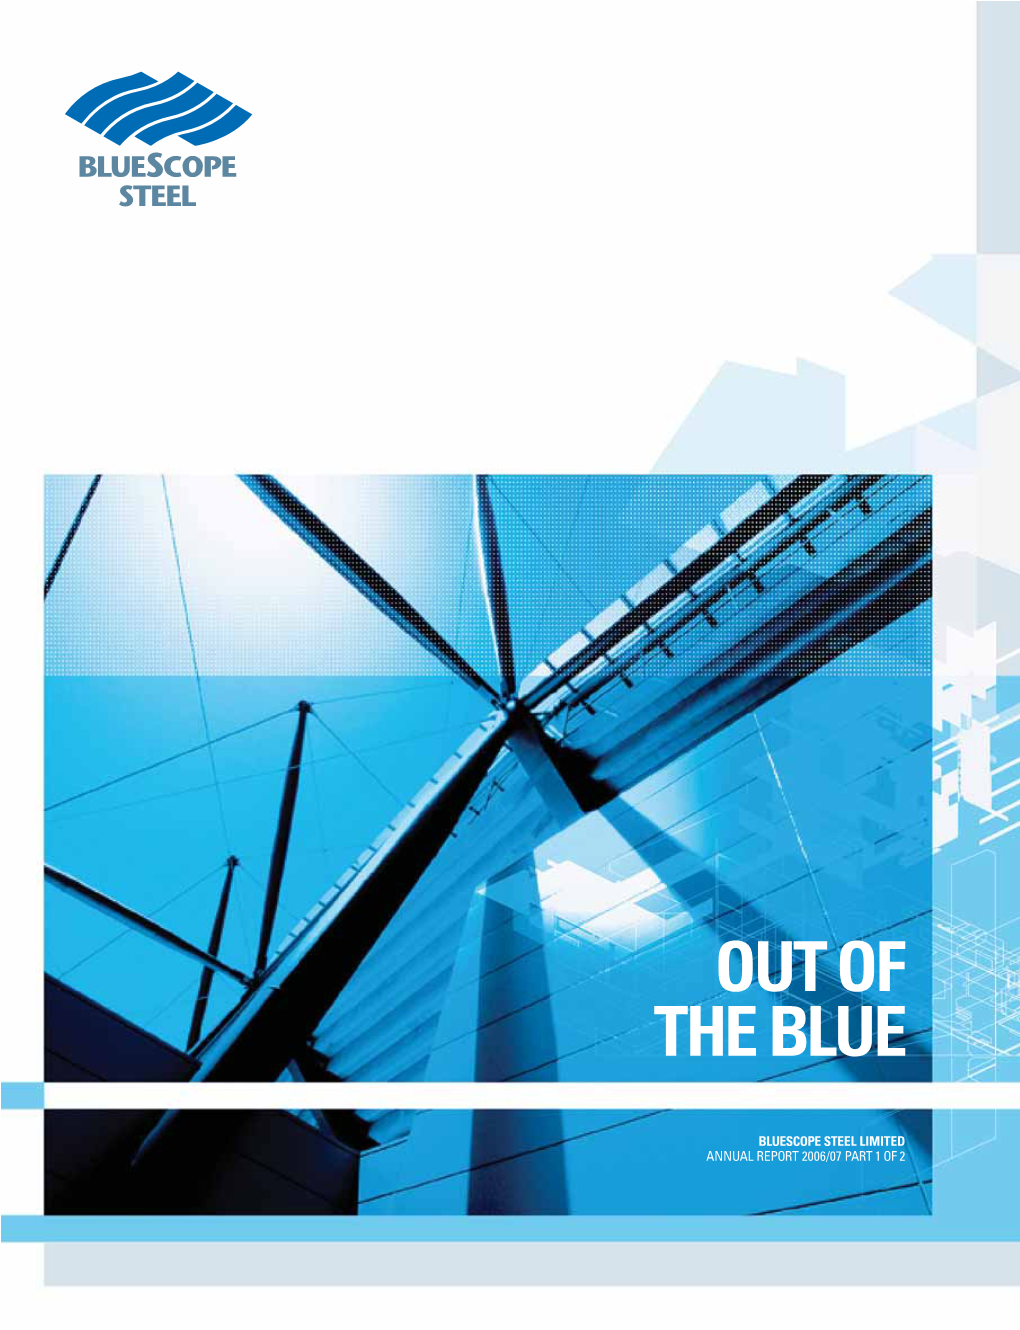 Bluescope Steel Limited Annual Report 2006/07 Part 1 of 2 Bluescope Building a Team